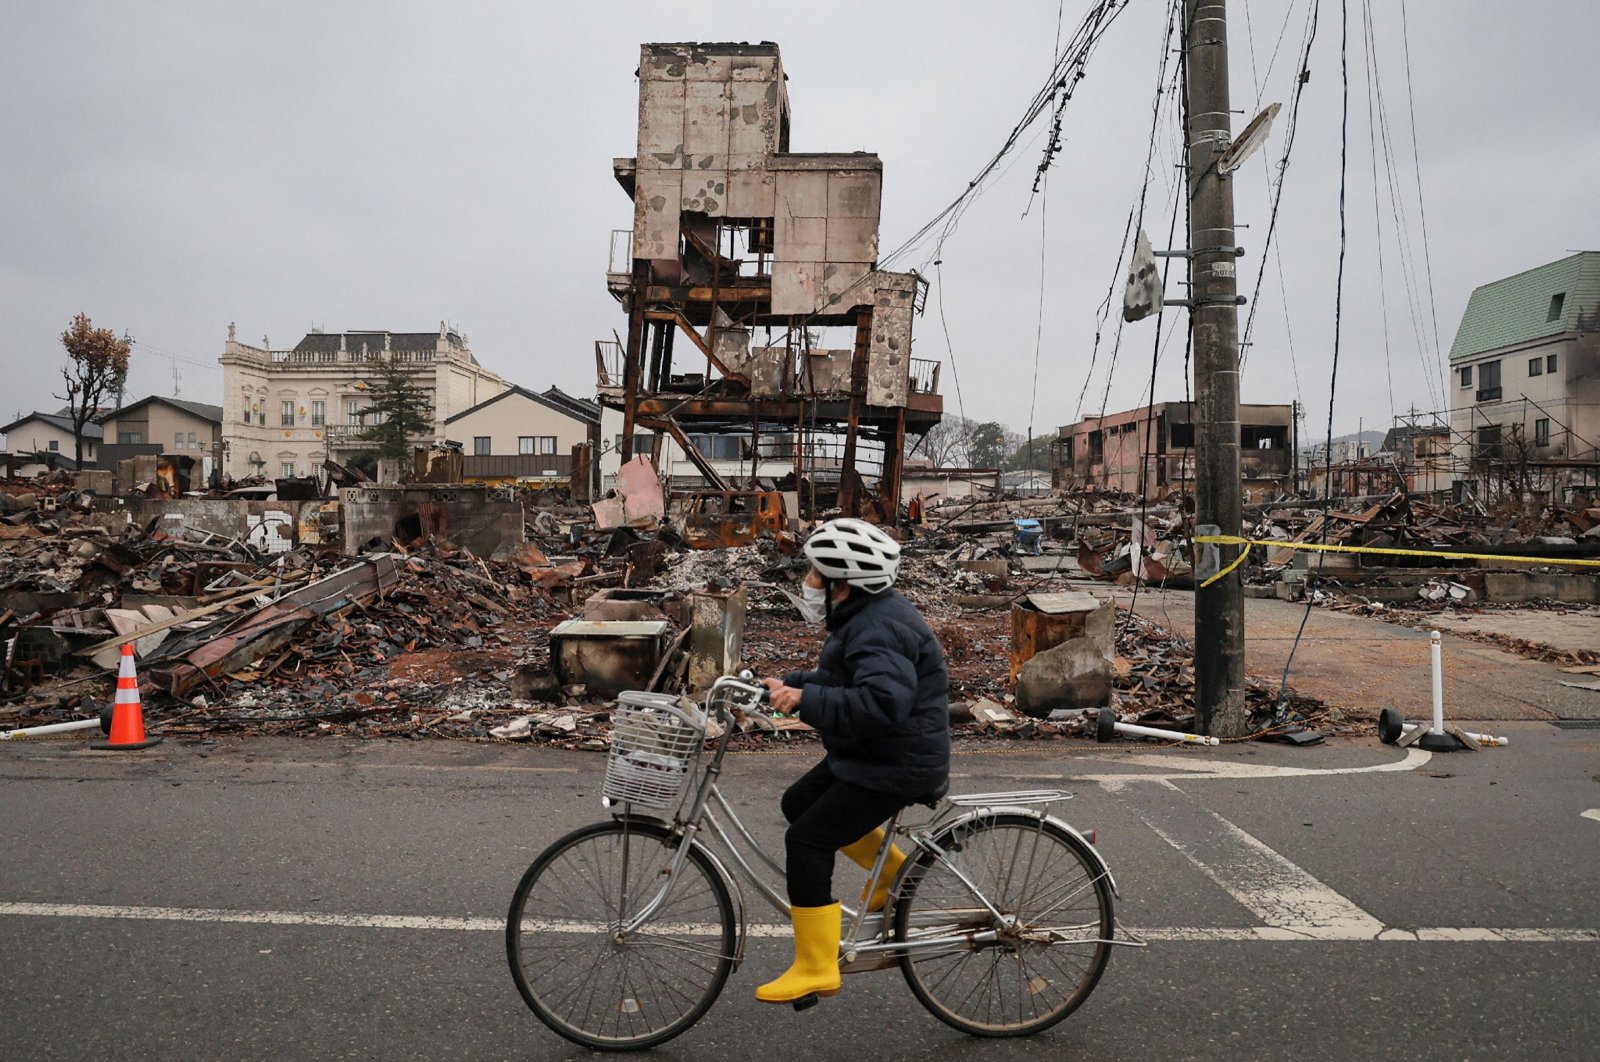 A person rides a bicycle past the rubble of buildings destroyed by a fire in the popular Asaichi Dori area in the city of Wajima, one month after a major 7.5 magnitude earthquake struck the Noto region, Ishikawa Prefecture, Japan, Feb. 1, 2024. (AFP Photo)